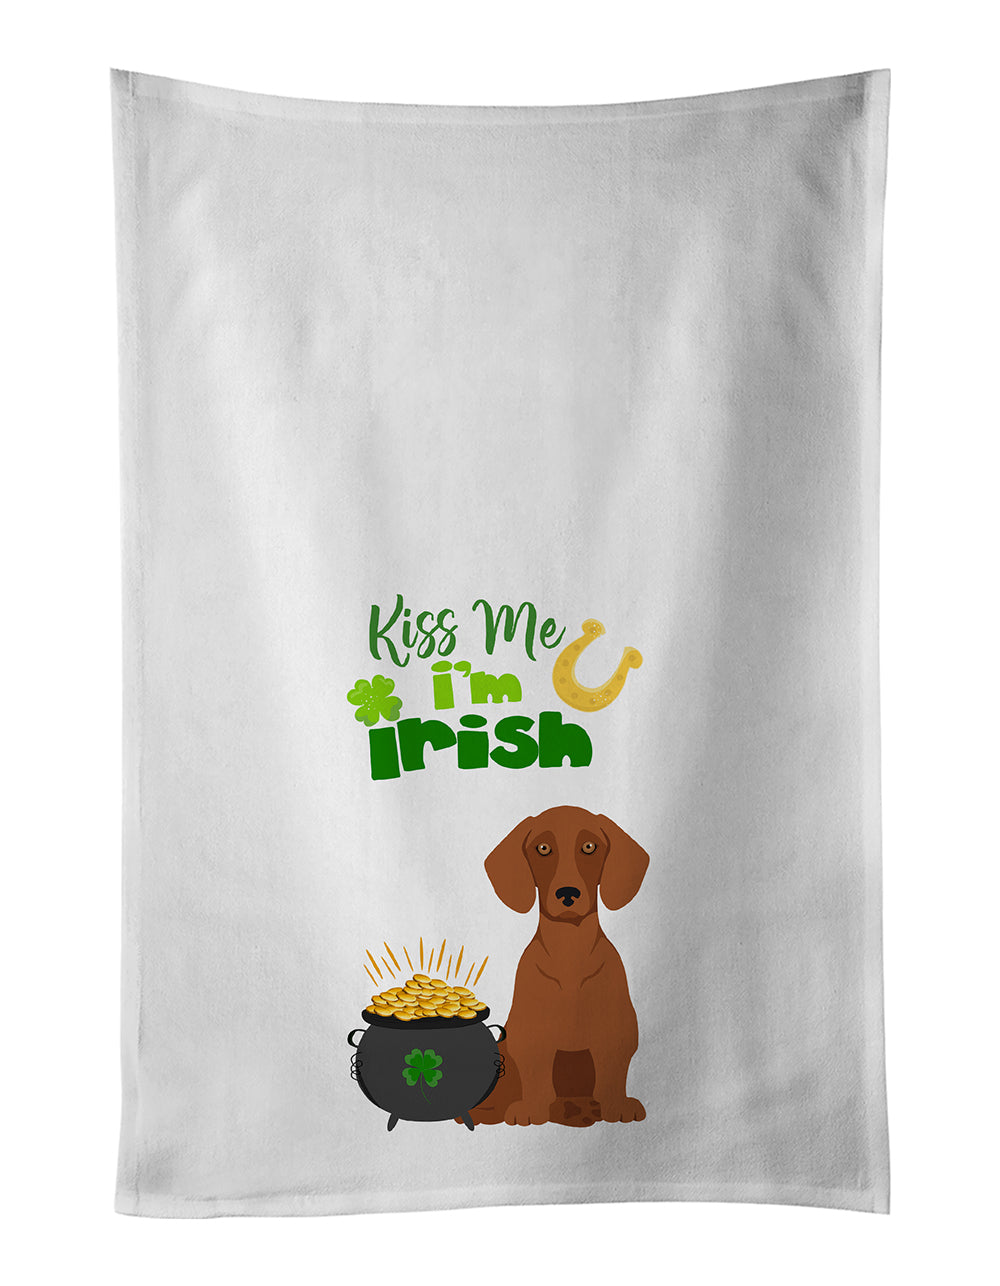 Buy this Red Dachshund St. Patrick's Day White Kitchen Towel Set of 2 Dish Towels